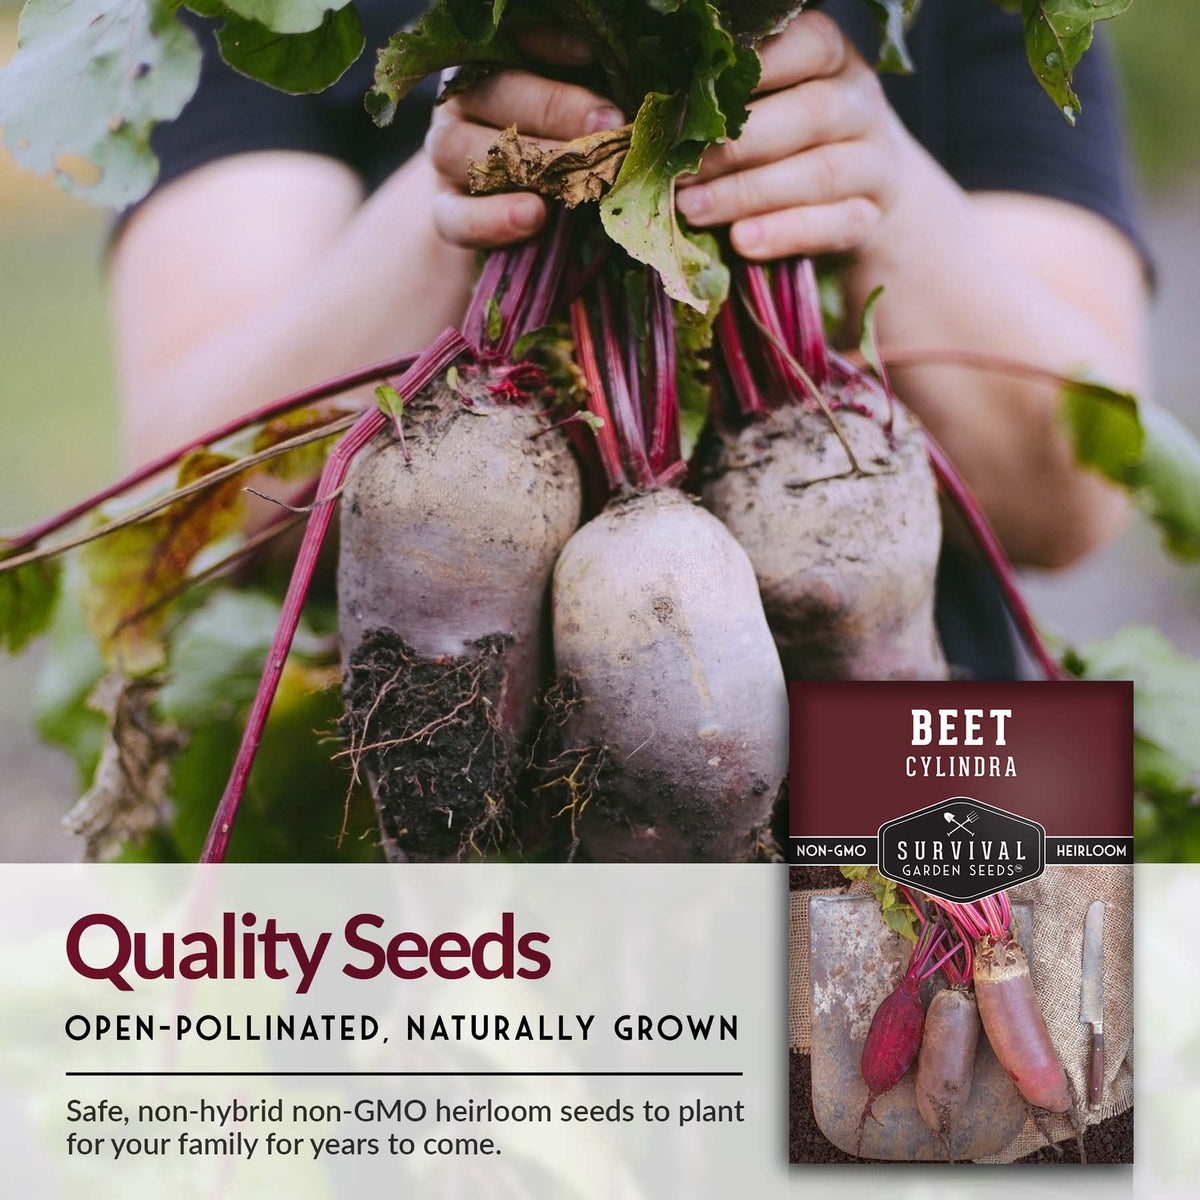 Open pollinated quality Cylindra beet seeds